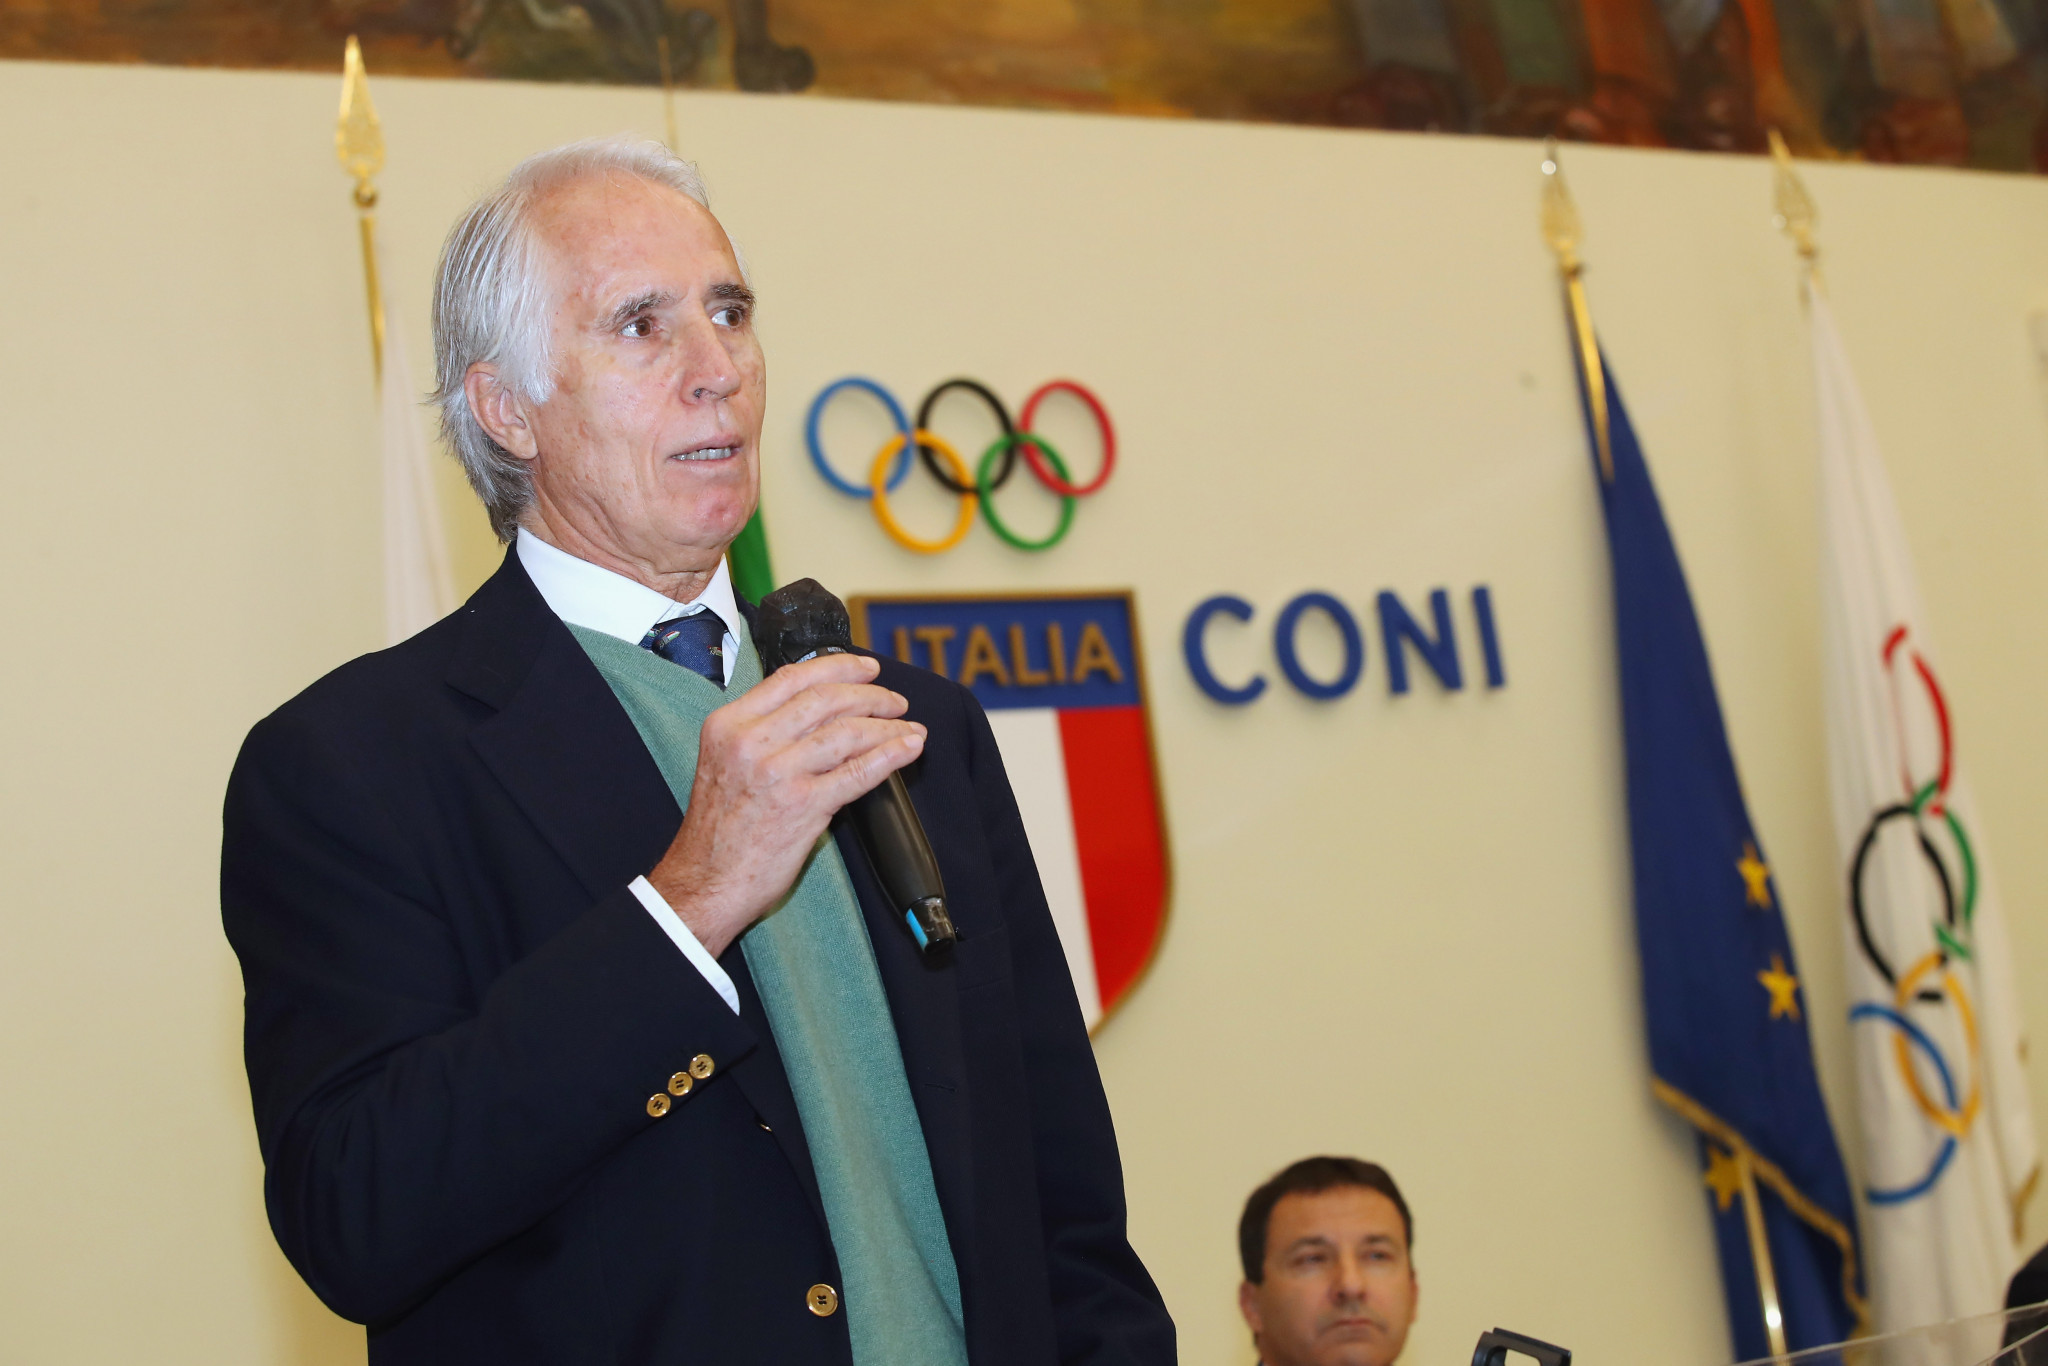 Milan Cortina 2026 President Giovanni Malago said he was grateful for the patience and cooperation of the IOC and its Coordination Commission ©Getty Images